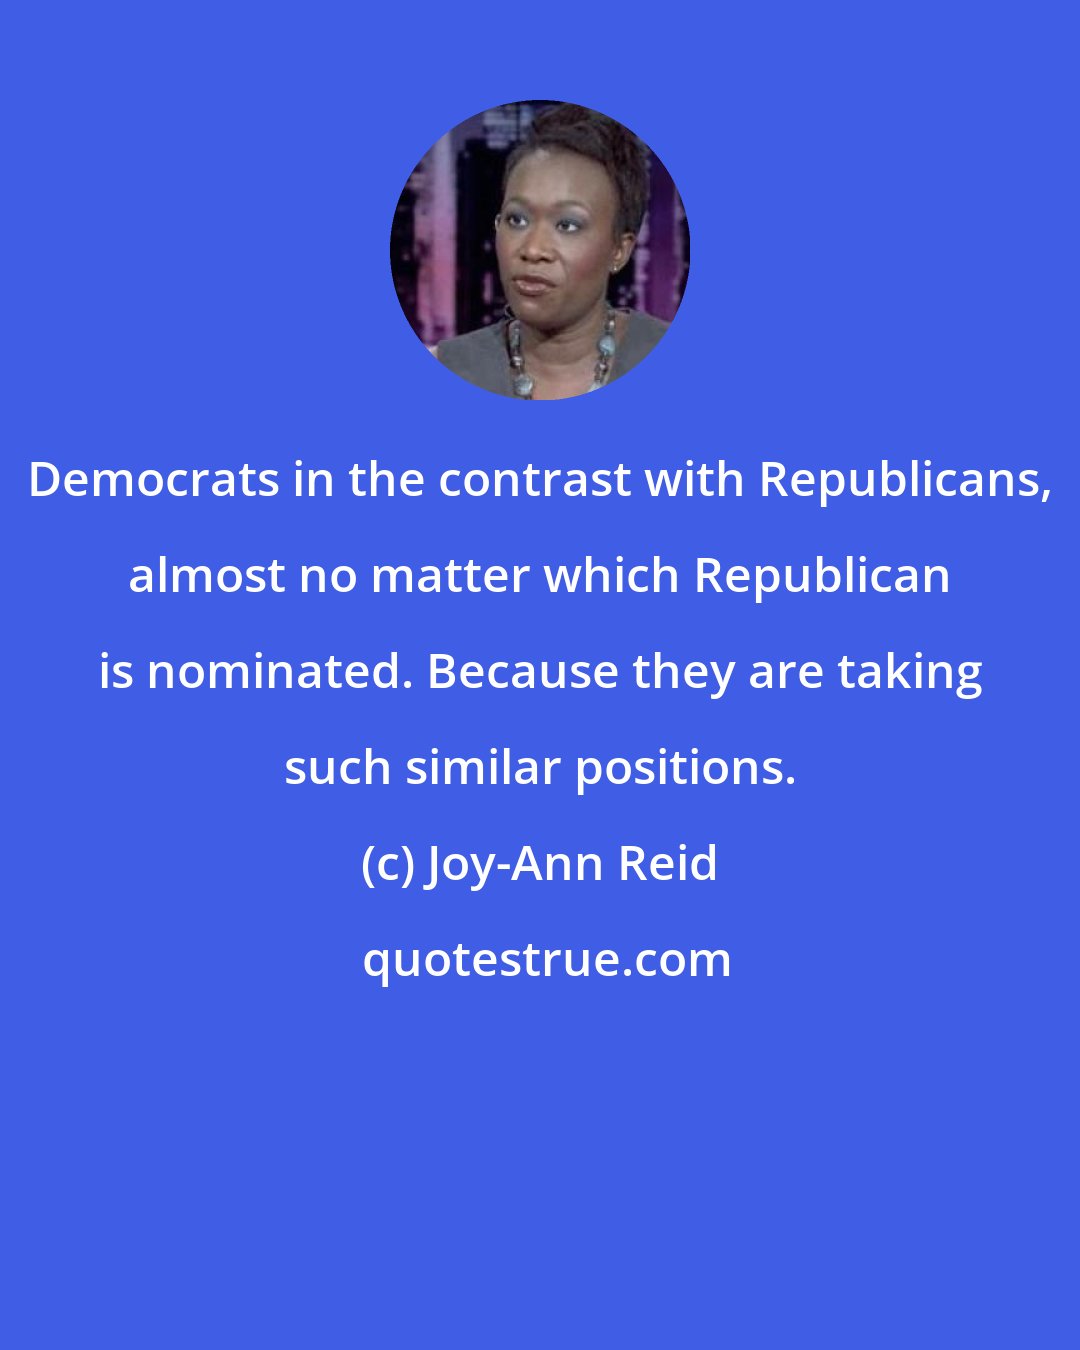 Joy-Ann Reid: Democrats in the contrast with Republicans, almost no matter which Republican is nominated. Because they are taking such similar positions.